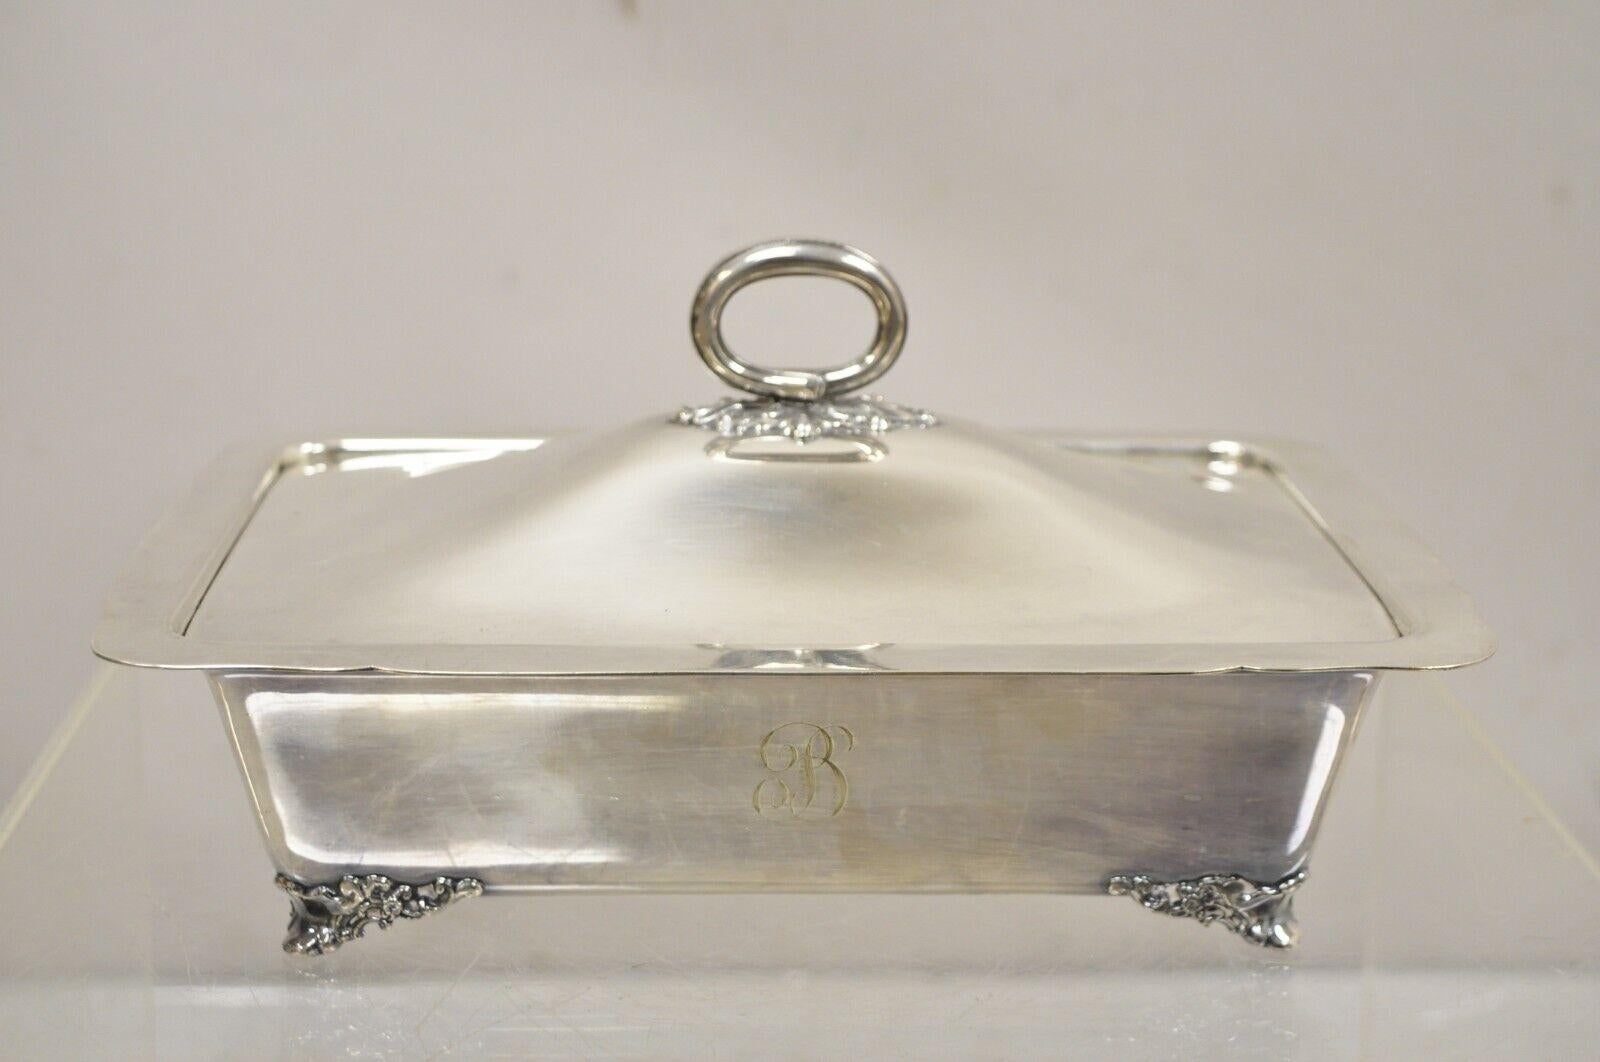 Vintage Reed & Barton Mayflower 5006 Silver Plated Covered Casserole Serving Dis For Sale 7